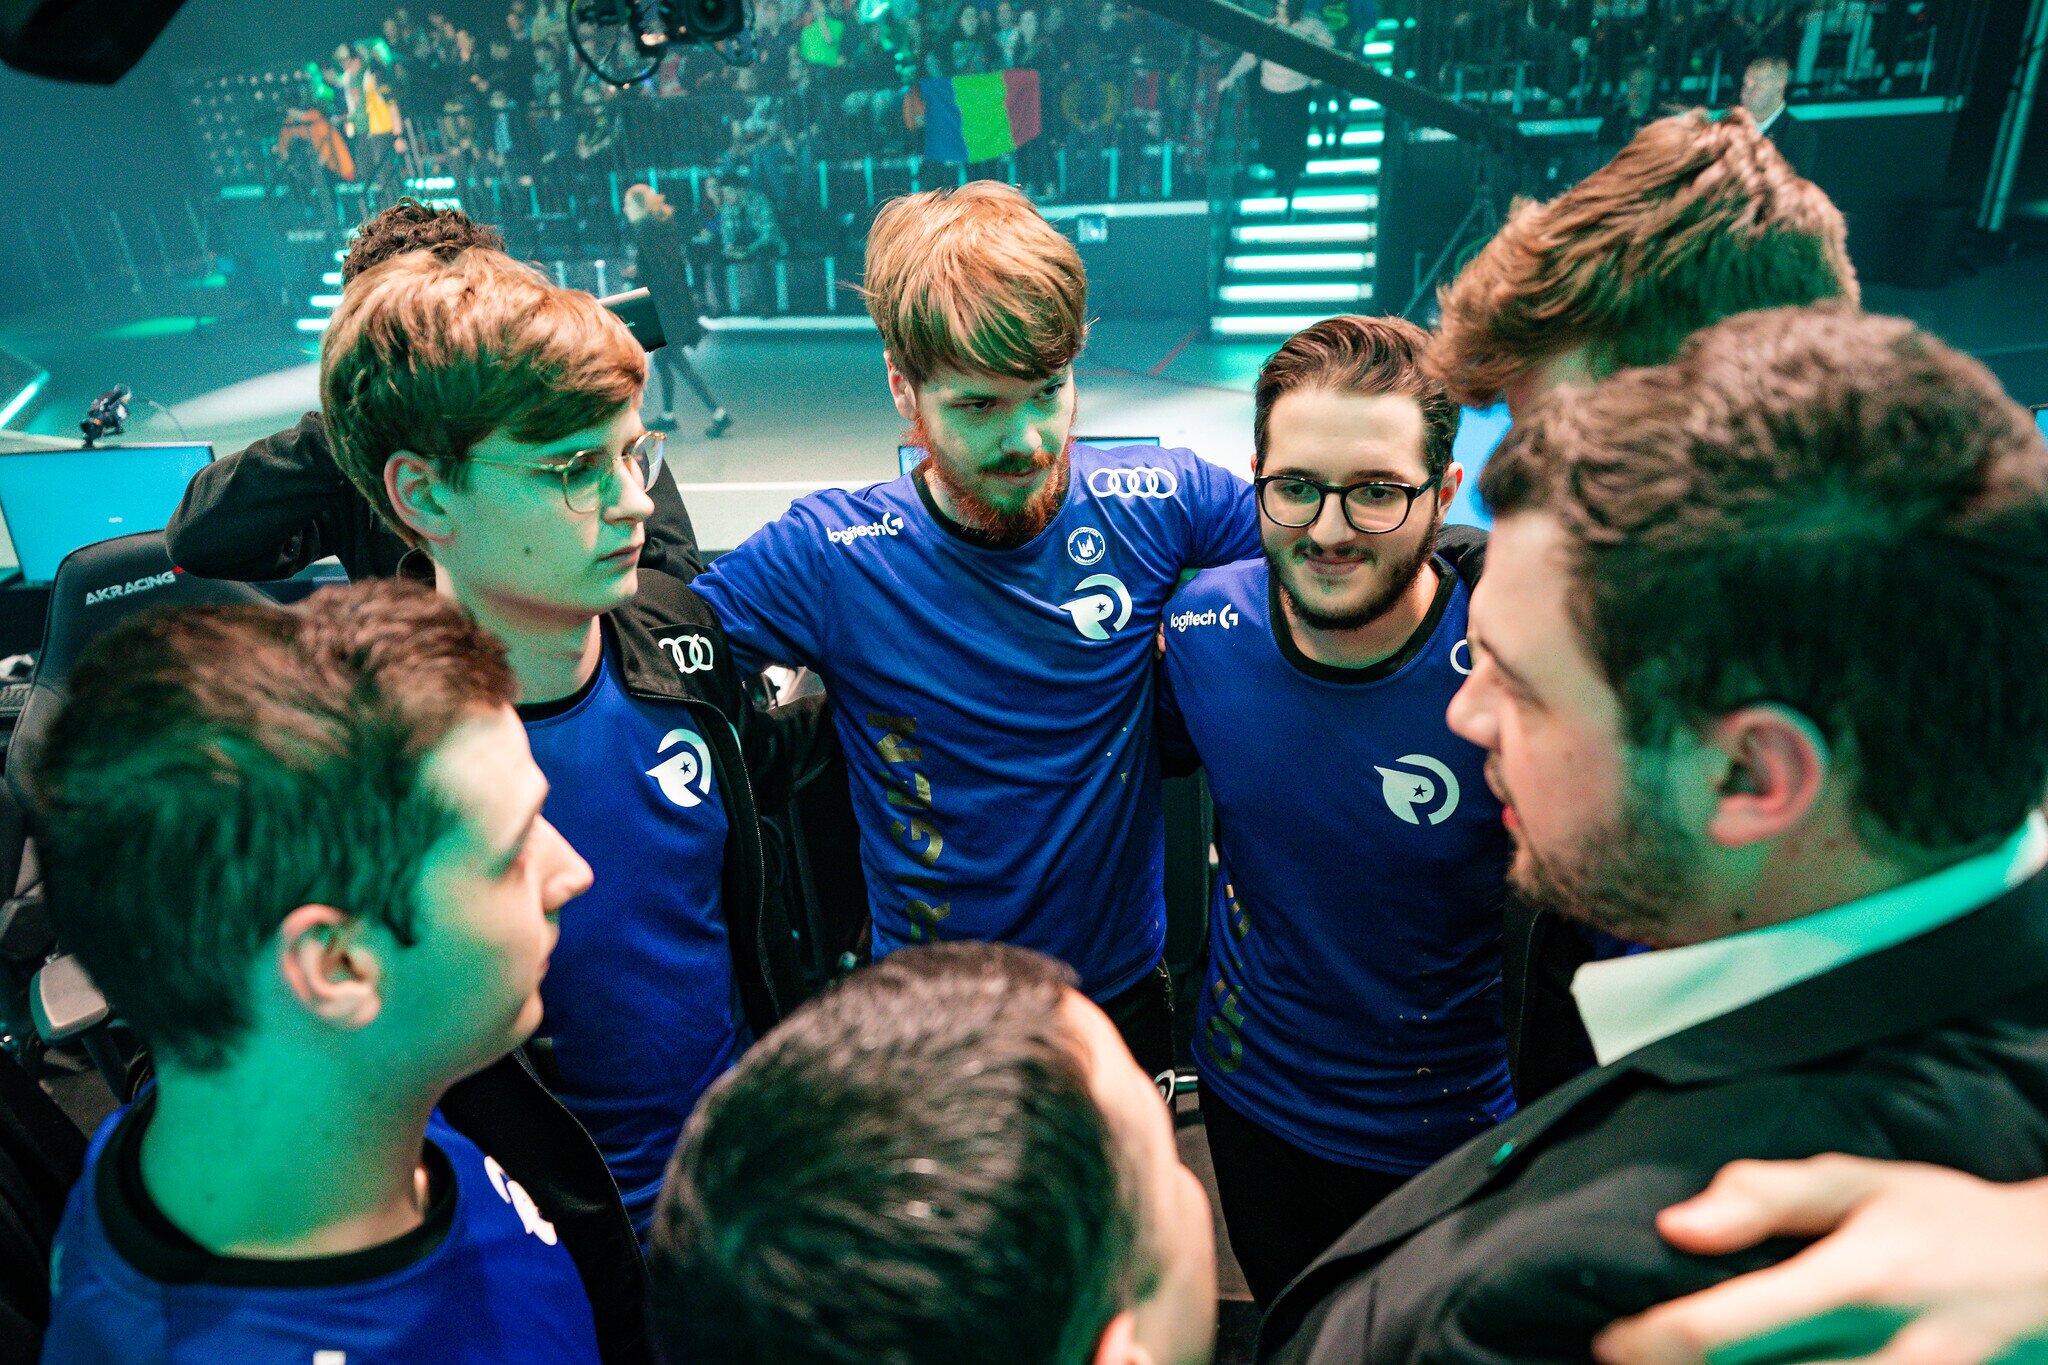 Origen took care of Rogue 3-1 in Round 2 of the LEC Playoffs to set up a date with G2 Esports. (Photo courtesy Michal Konkol - Riot Games)